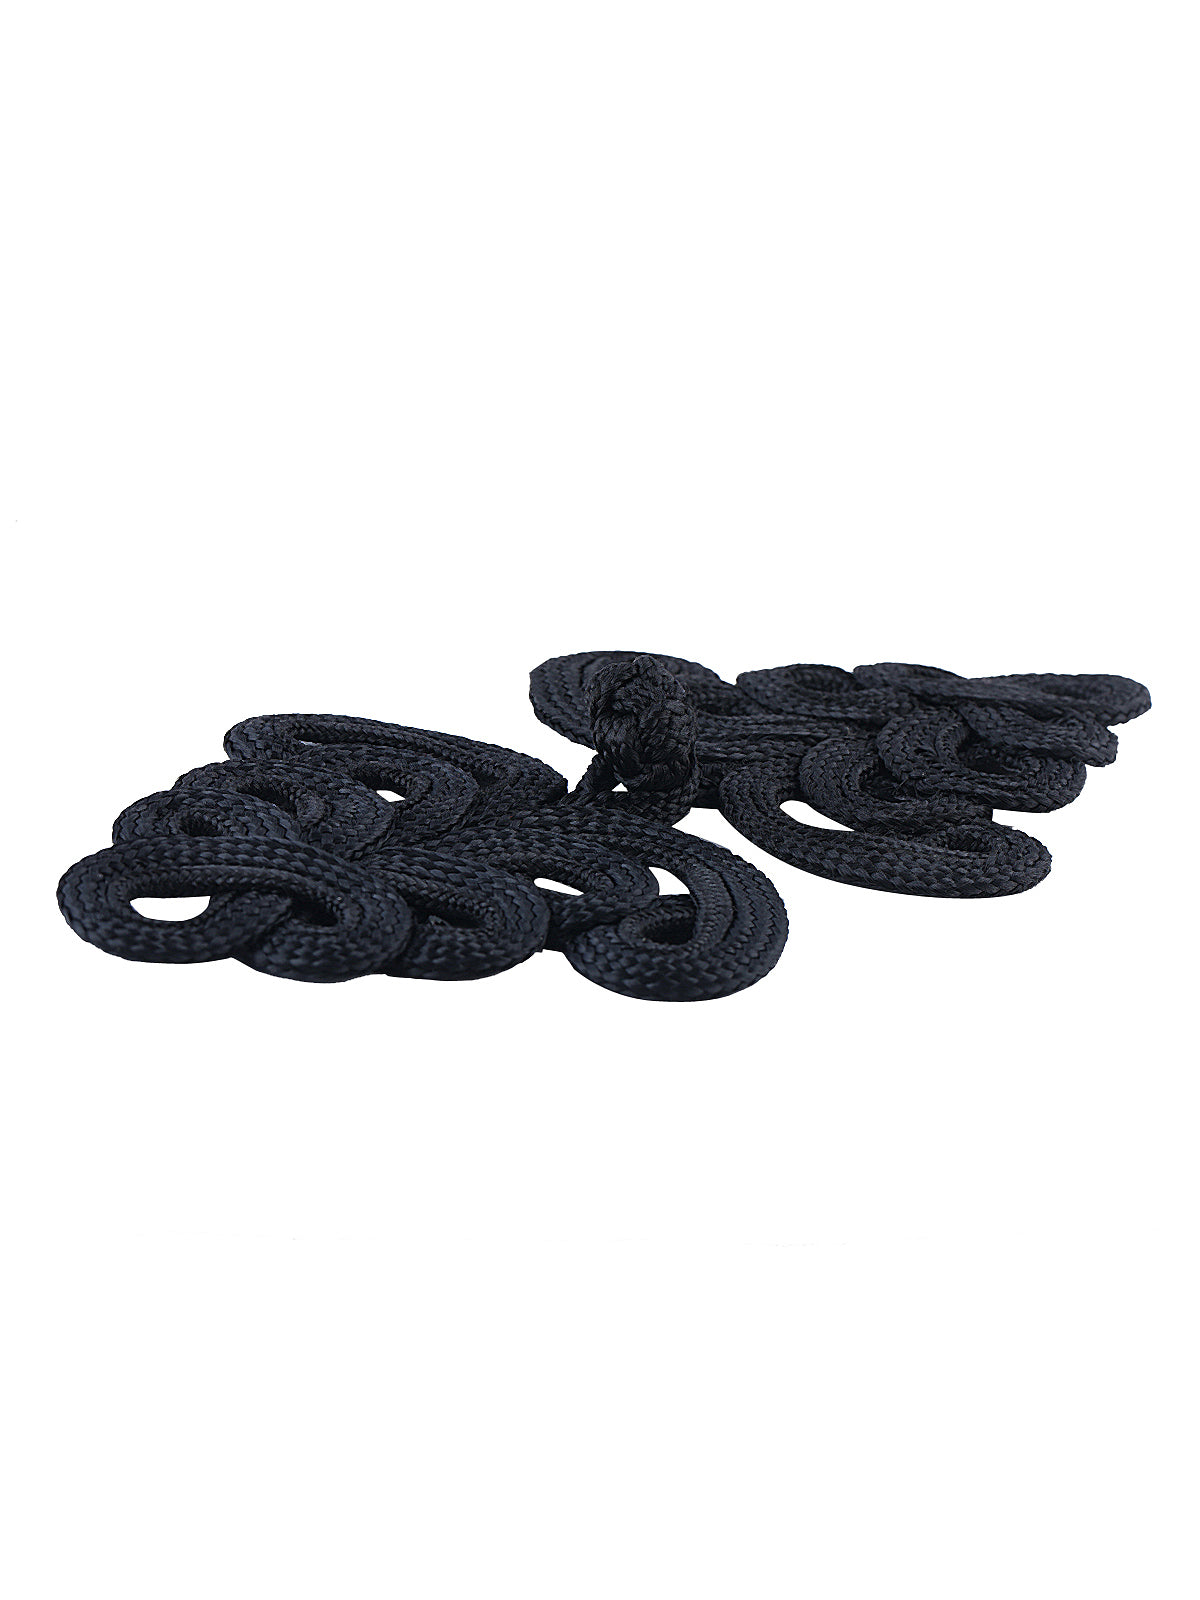 Black Braided Loopy Frog Knot Closure